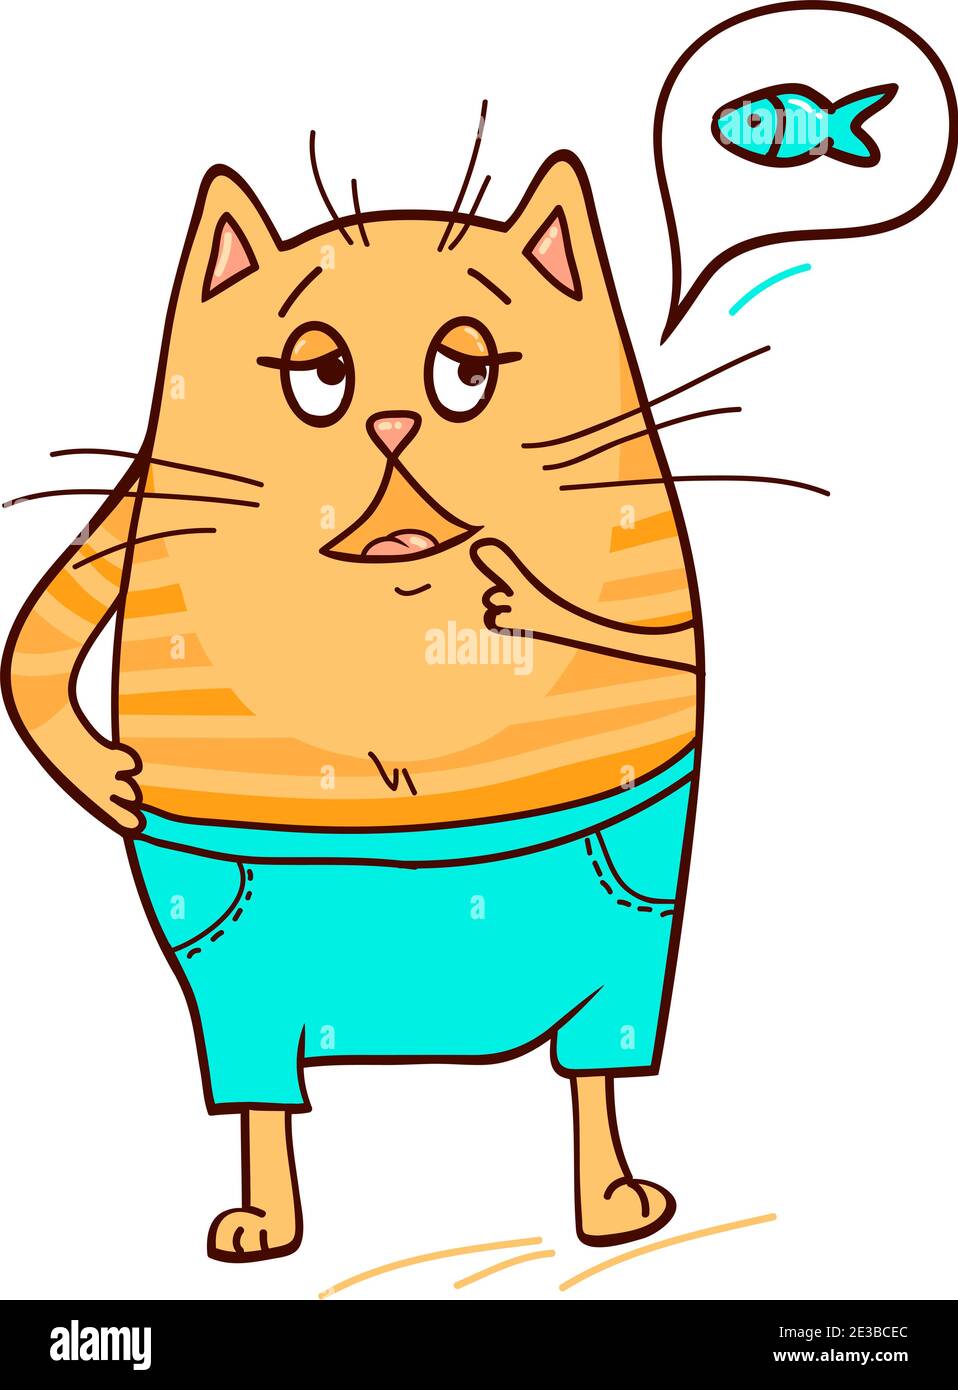 Cute ginger cat needs some fish. Vector illustration. Stock Vector